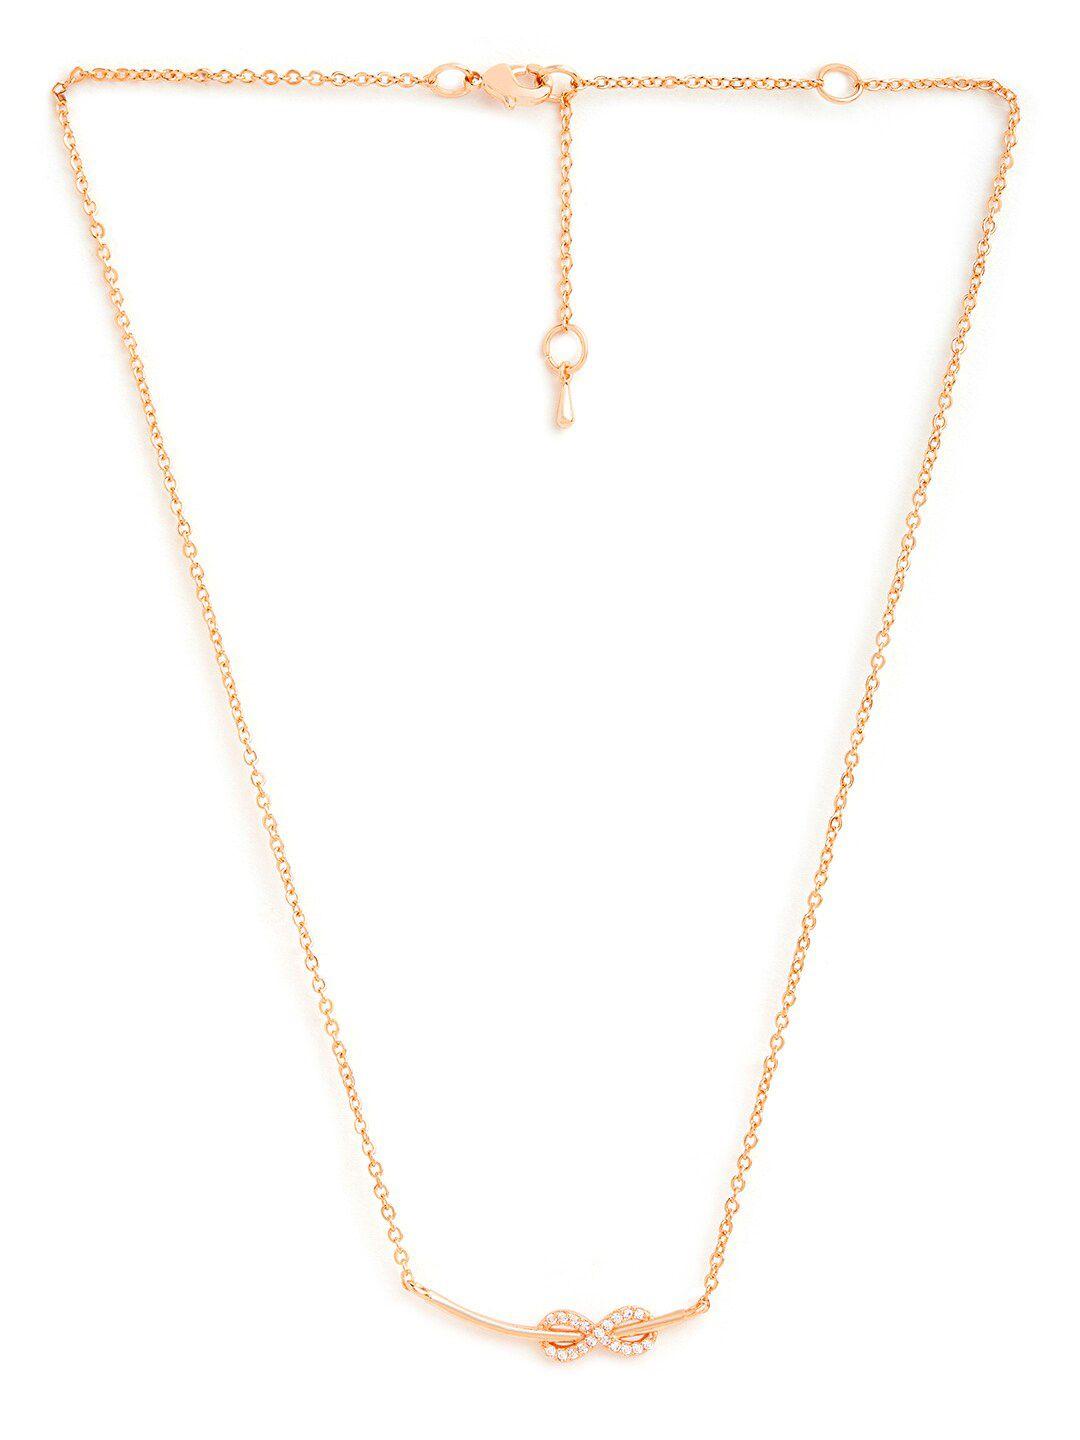 aika by minutiae brass rose gold-plated necklace